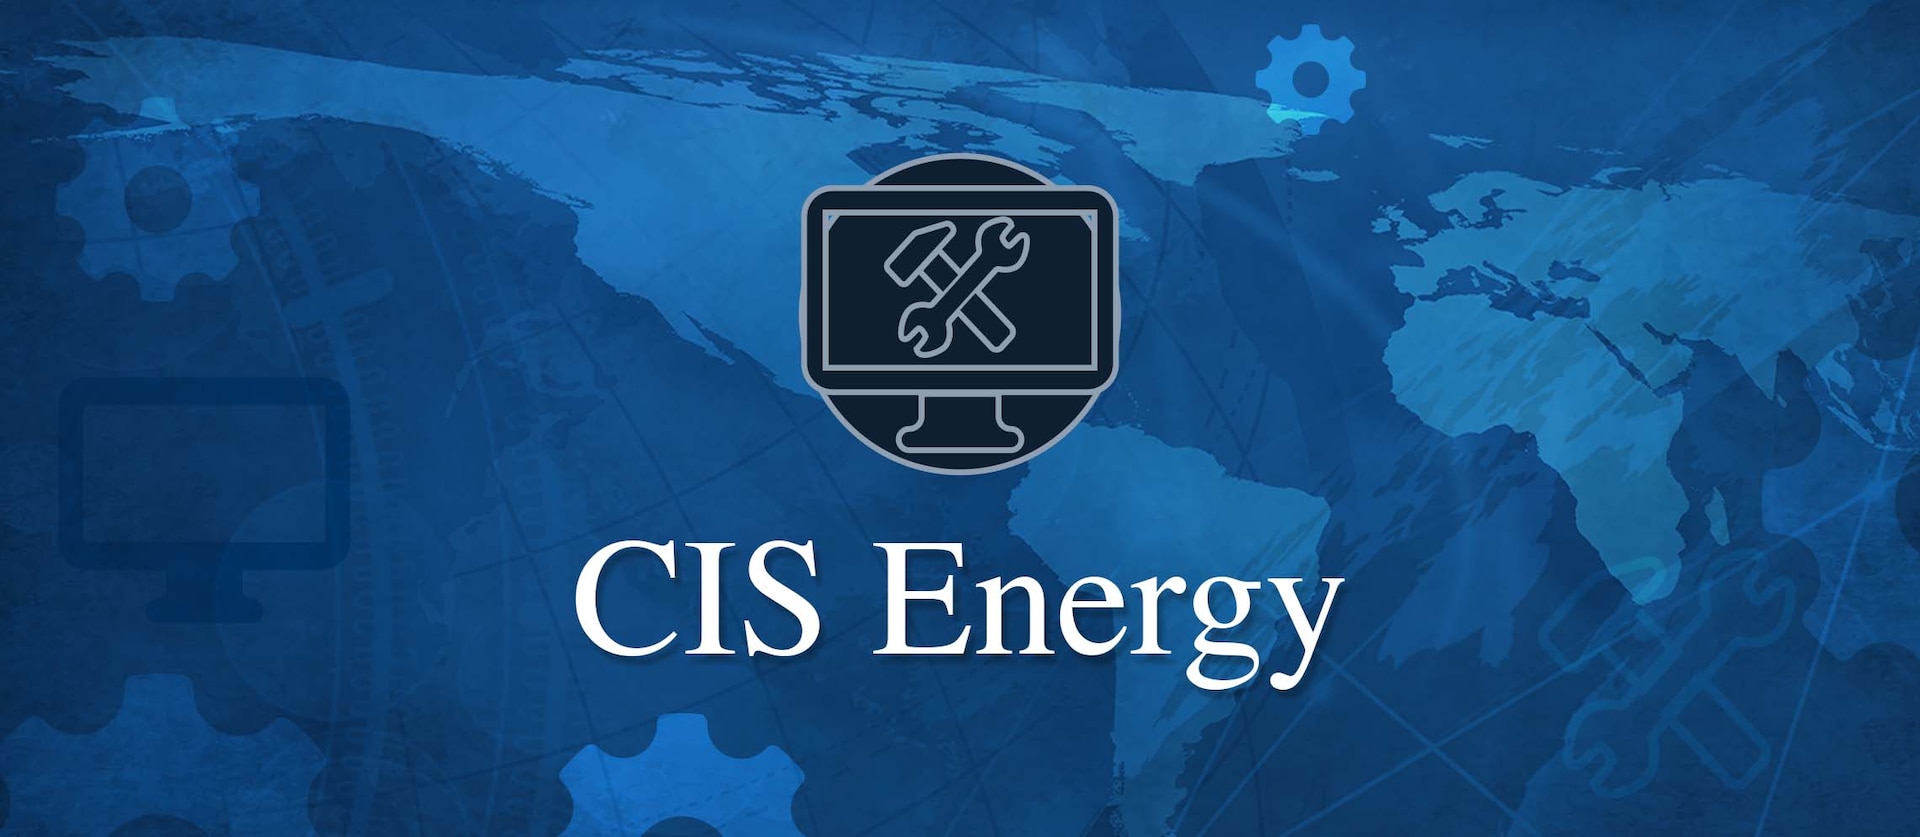 Banner for CIS Energy application